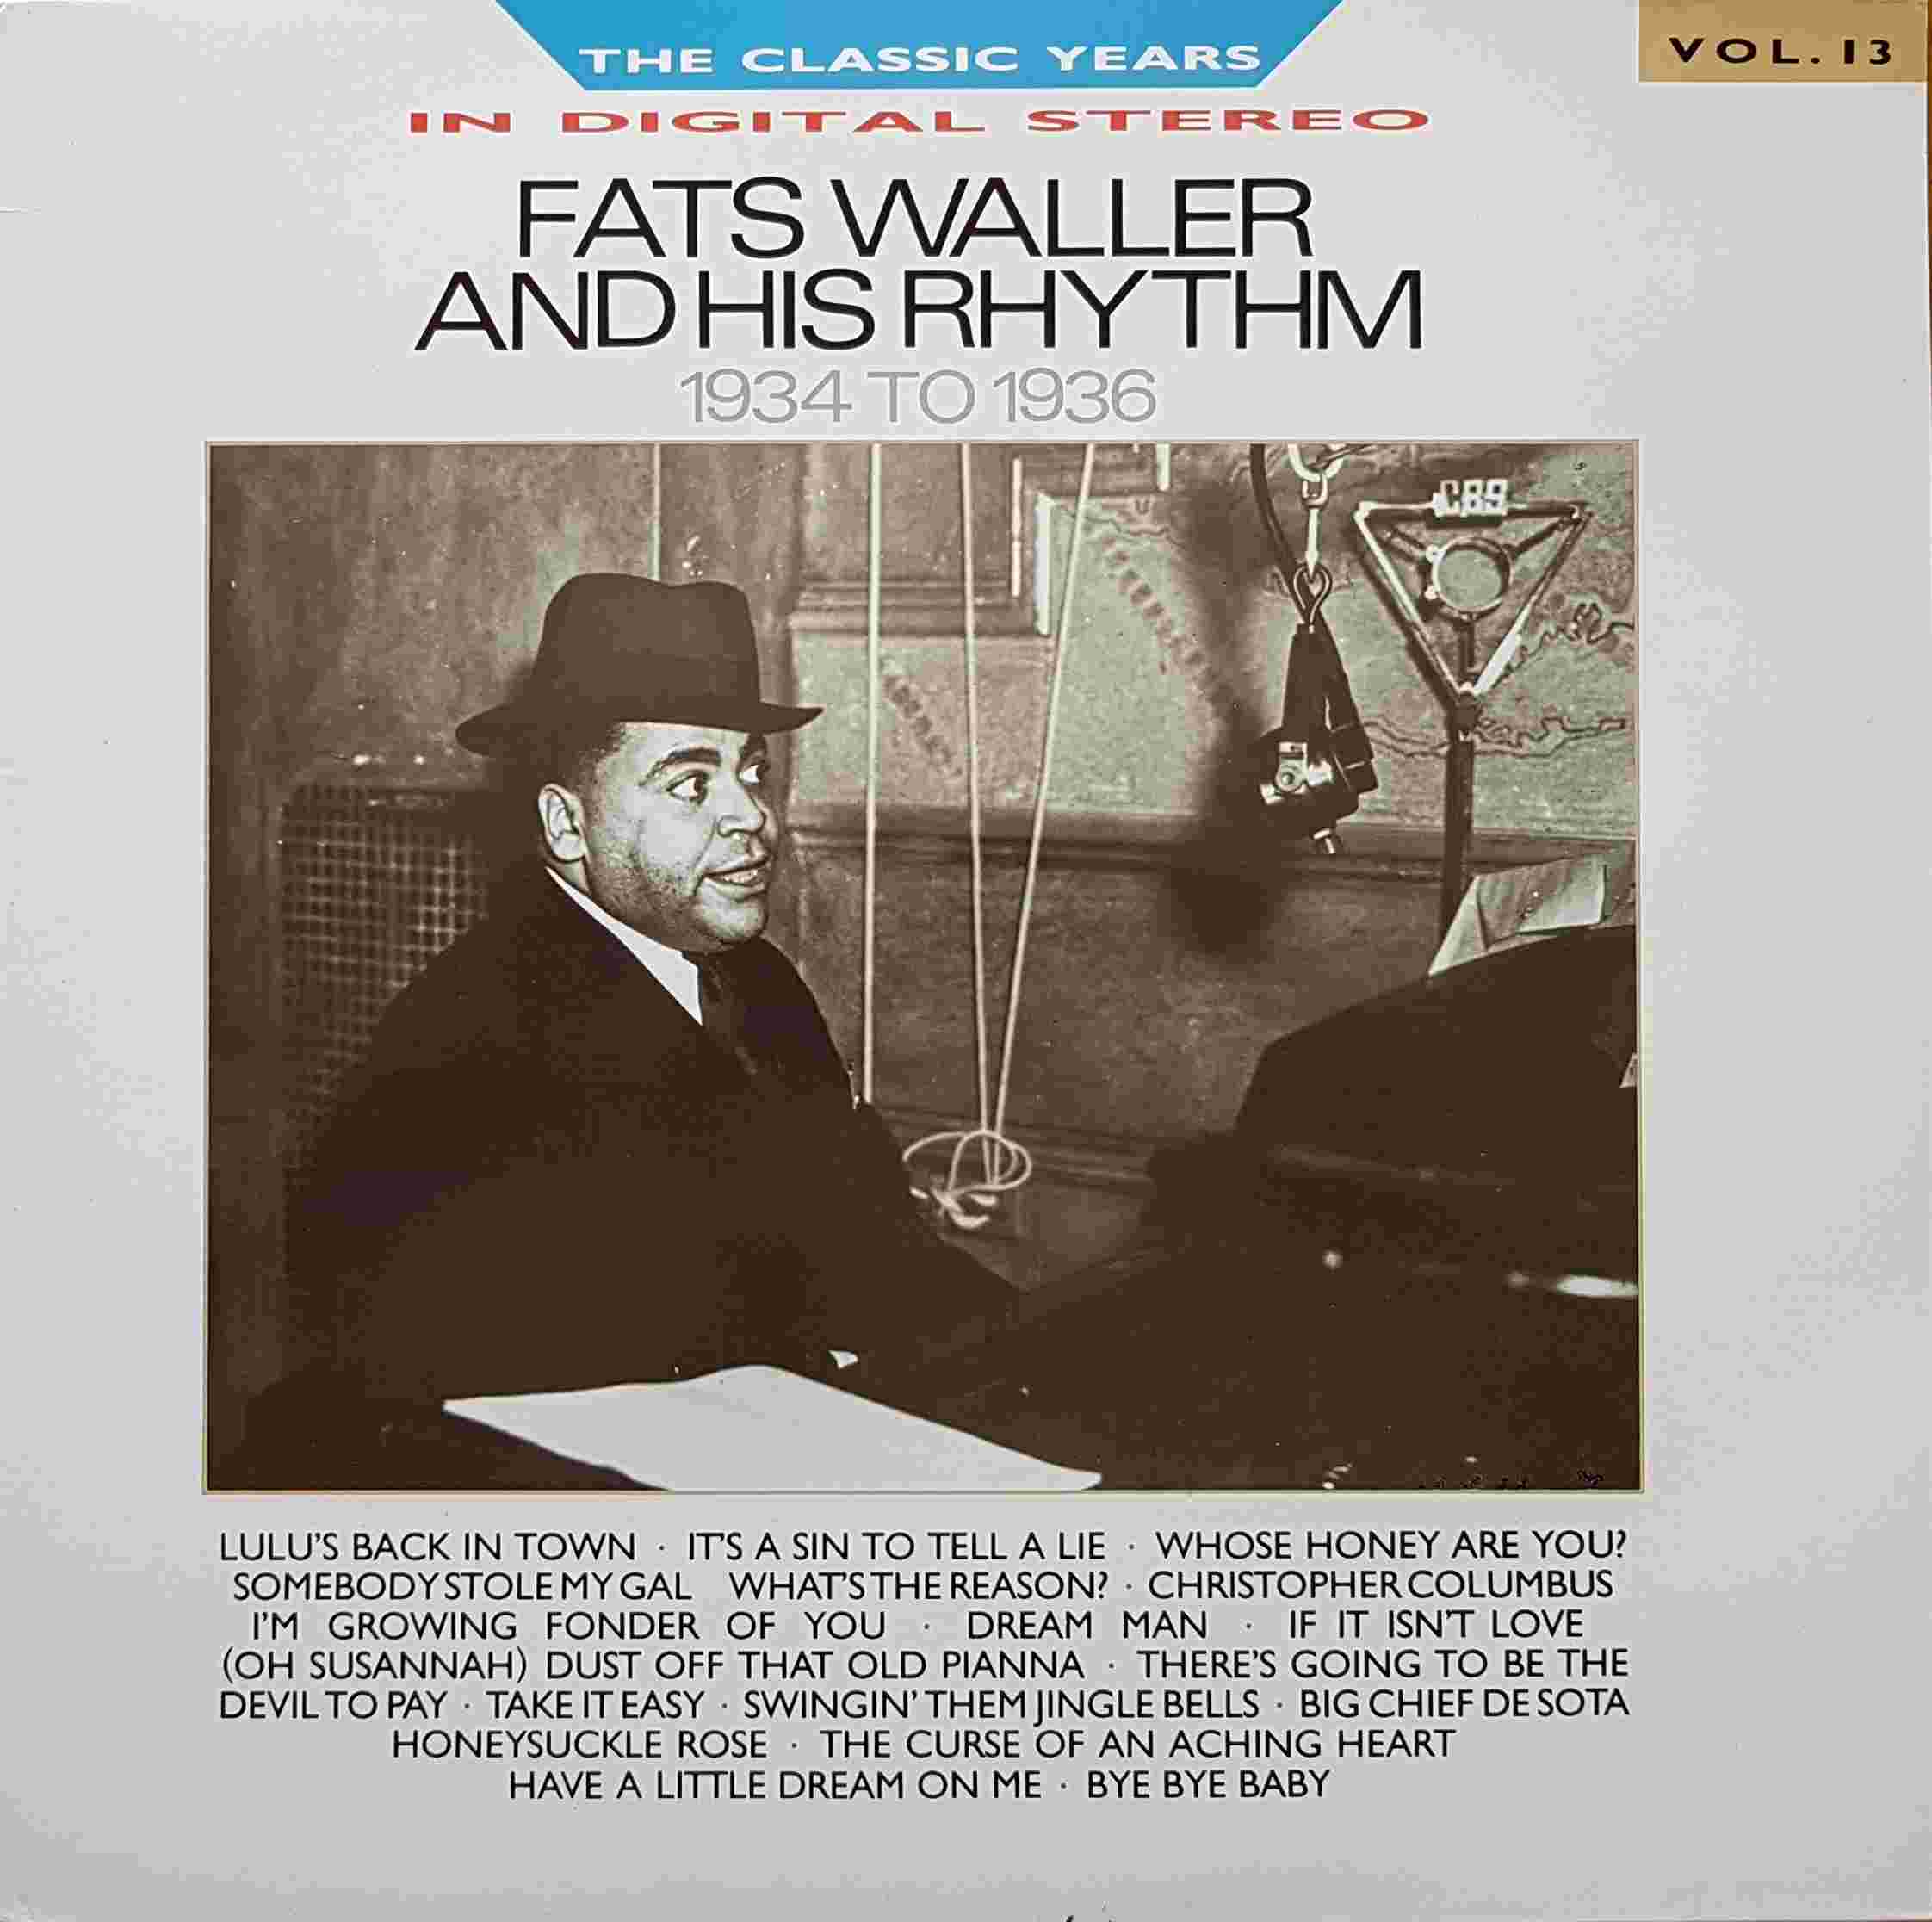 Picture of REB 684 Classic years - Volume 13, Fats Waller 1934 - 1936 by artist Fats Waller  from the BBC albums - Records and Tapes library